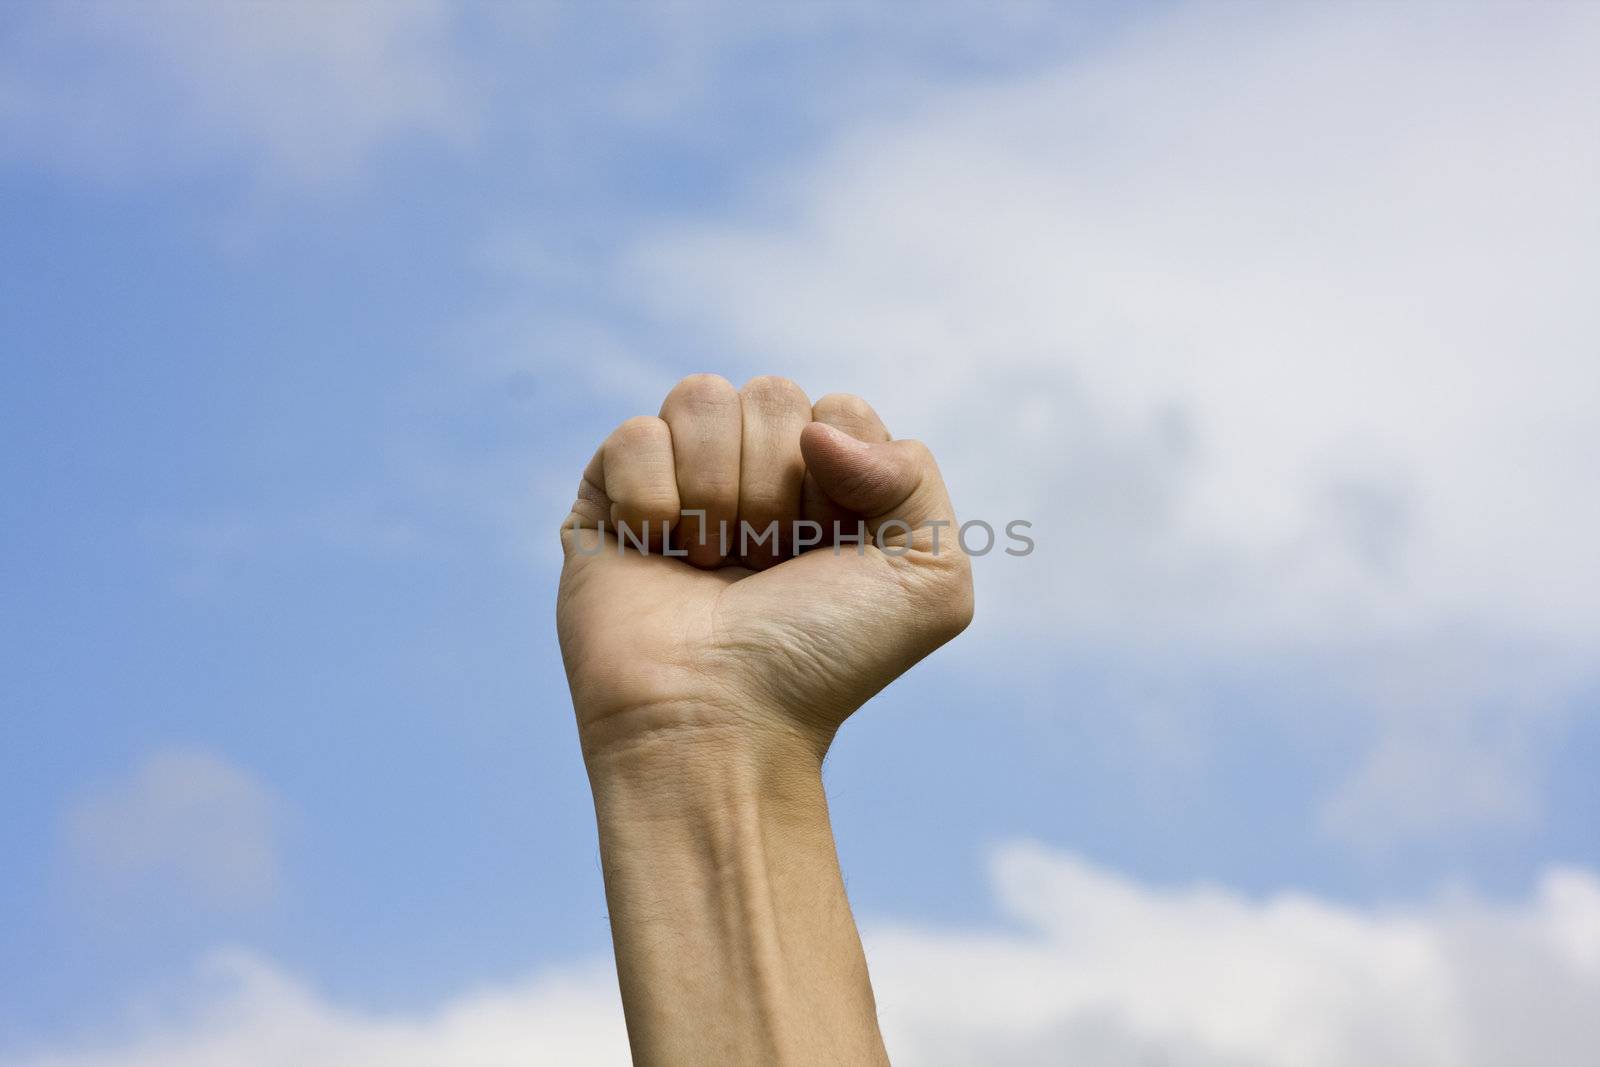 Hand with the Sky Background
to show challenge to a fight or contest.